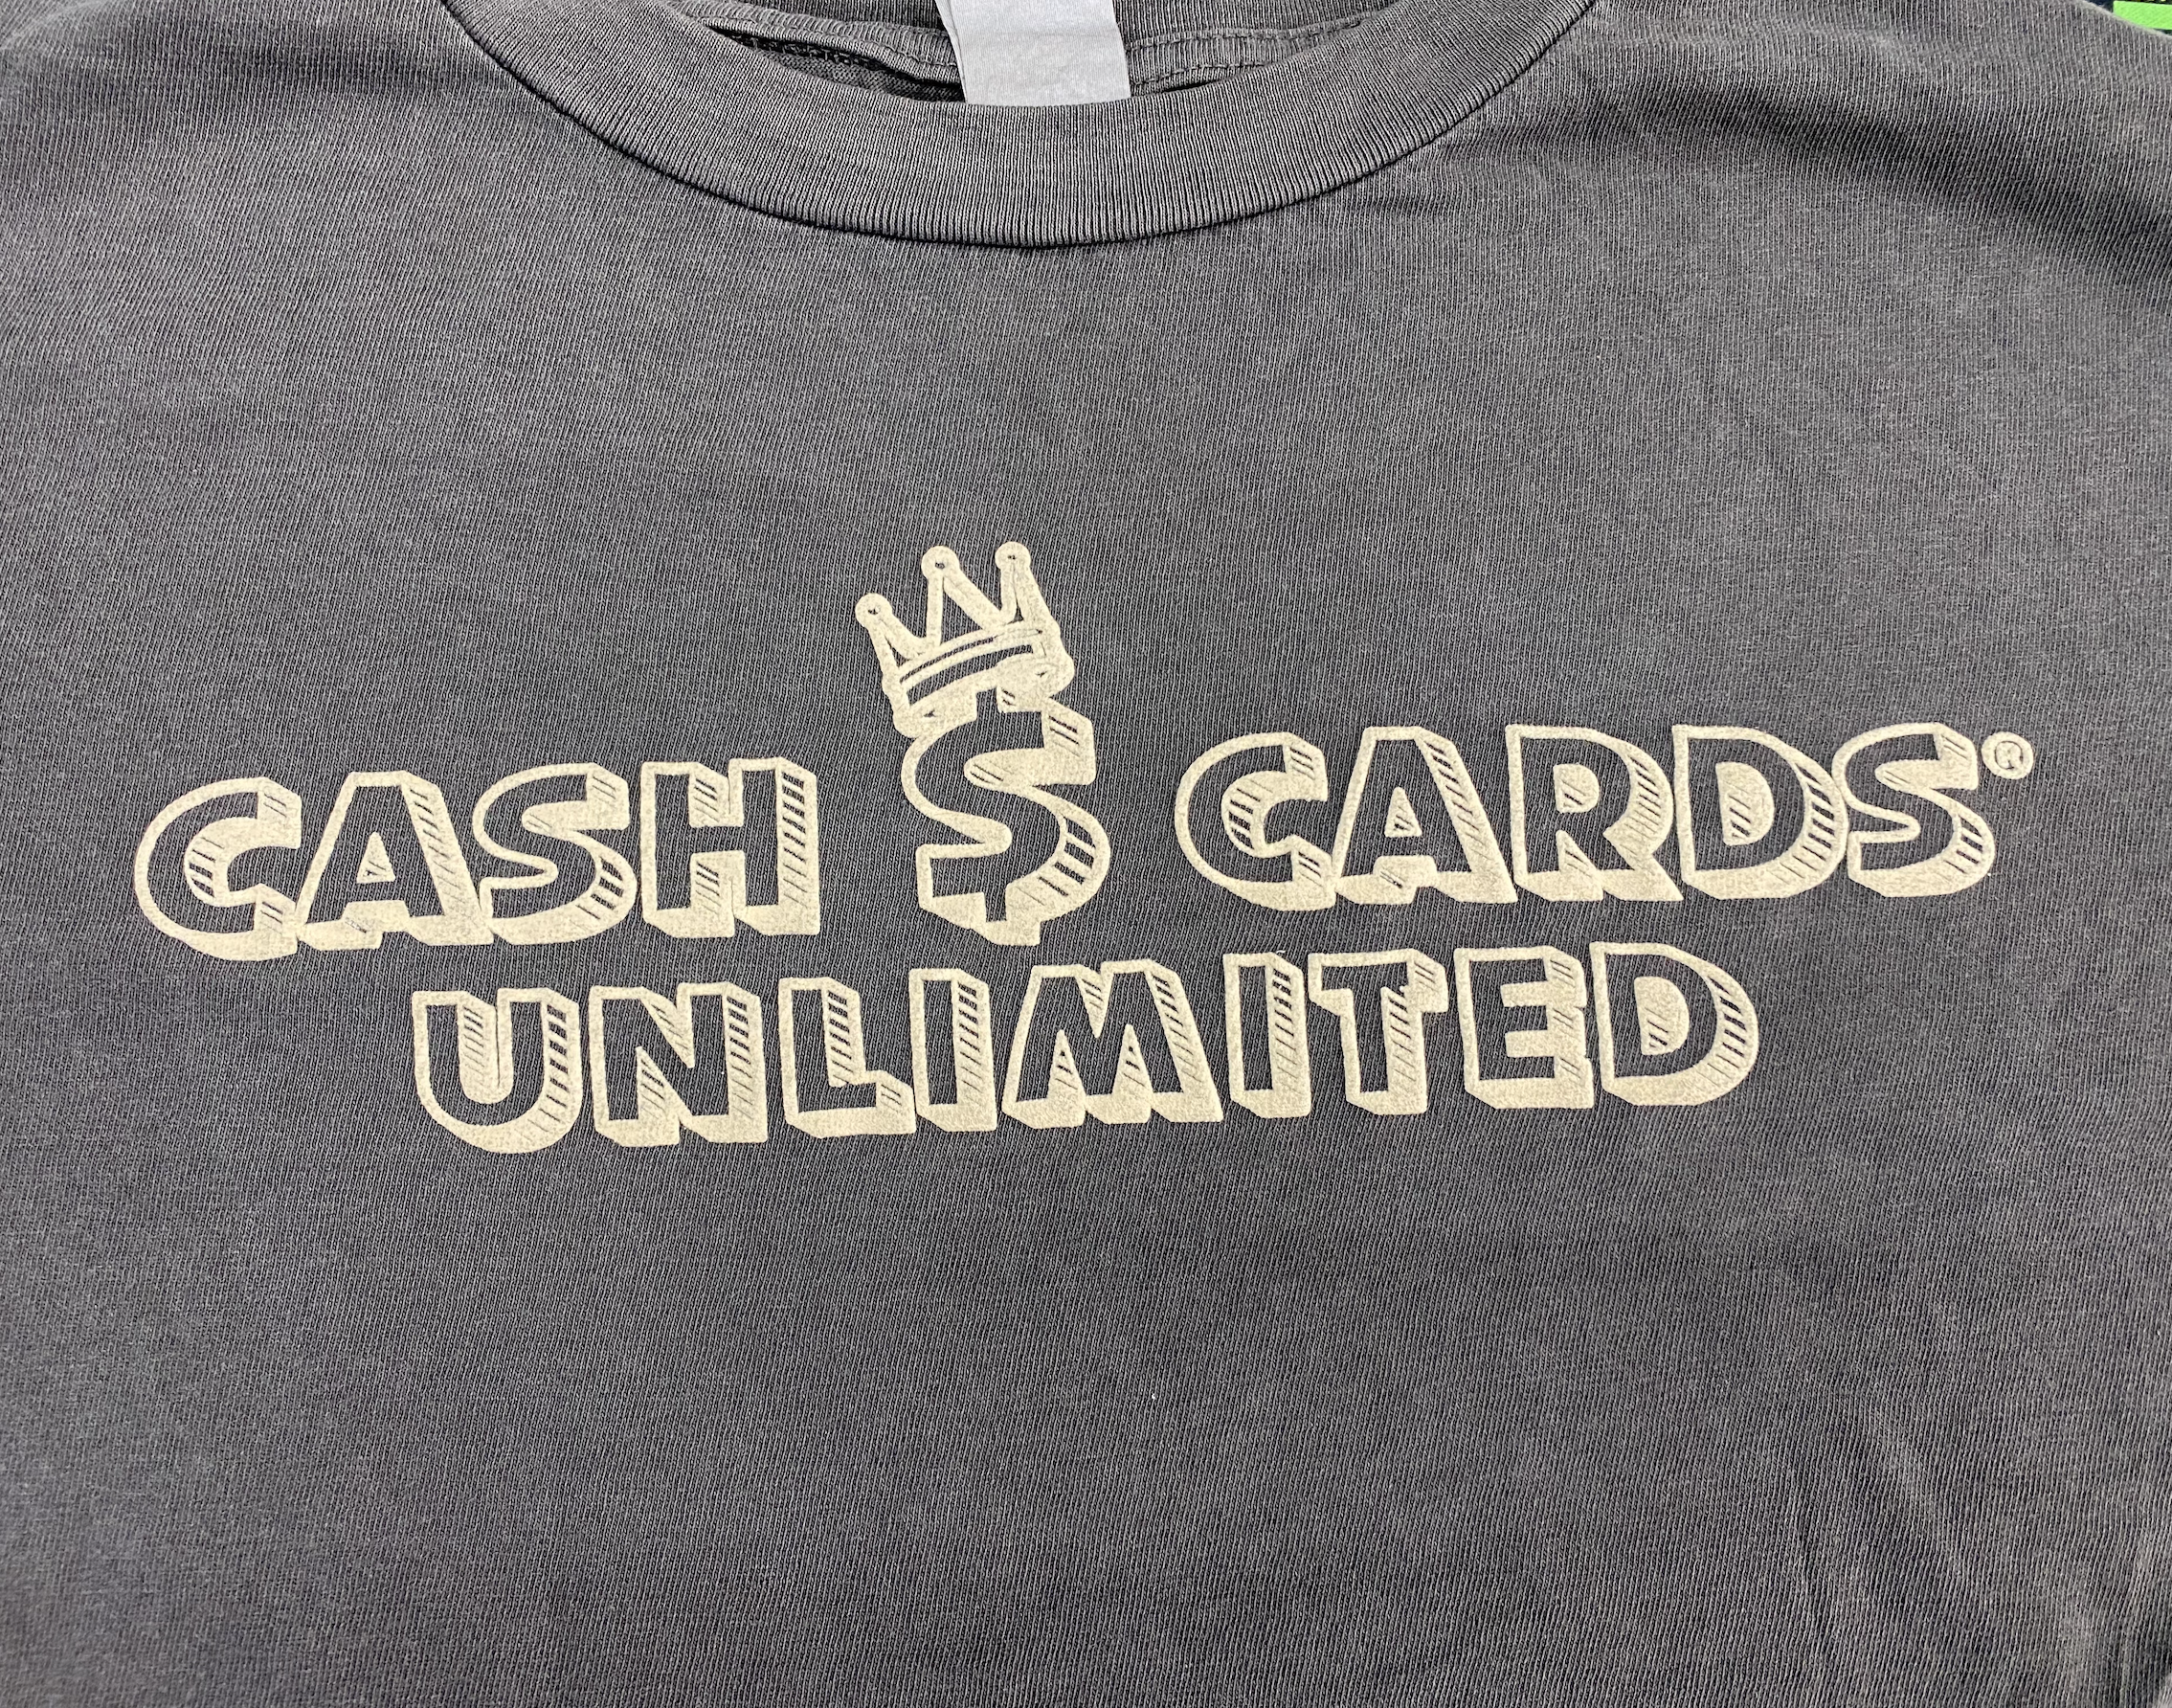 Cash Cards Unlimited Street Wear T-Shirt (Gray/2X-Large)